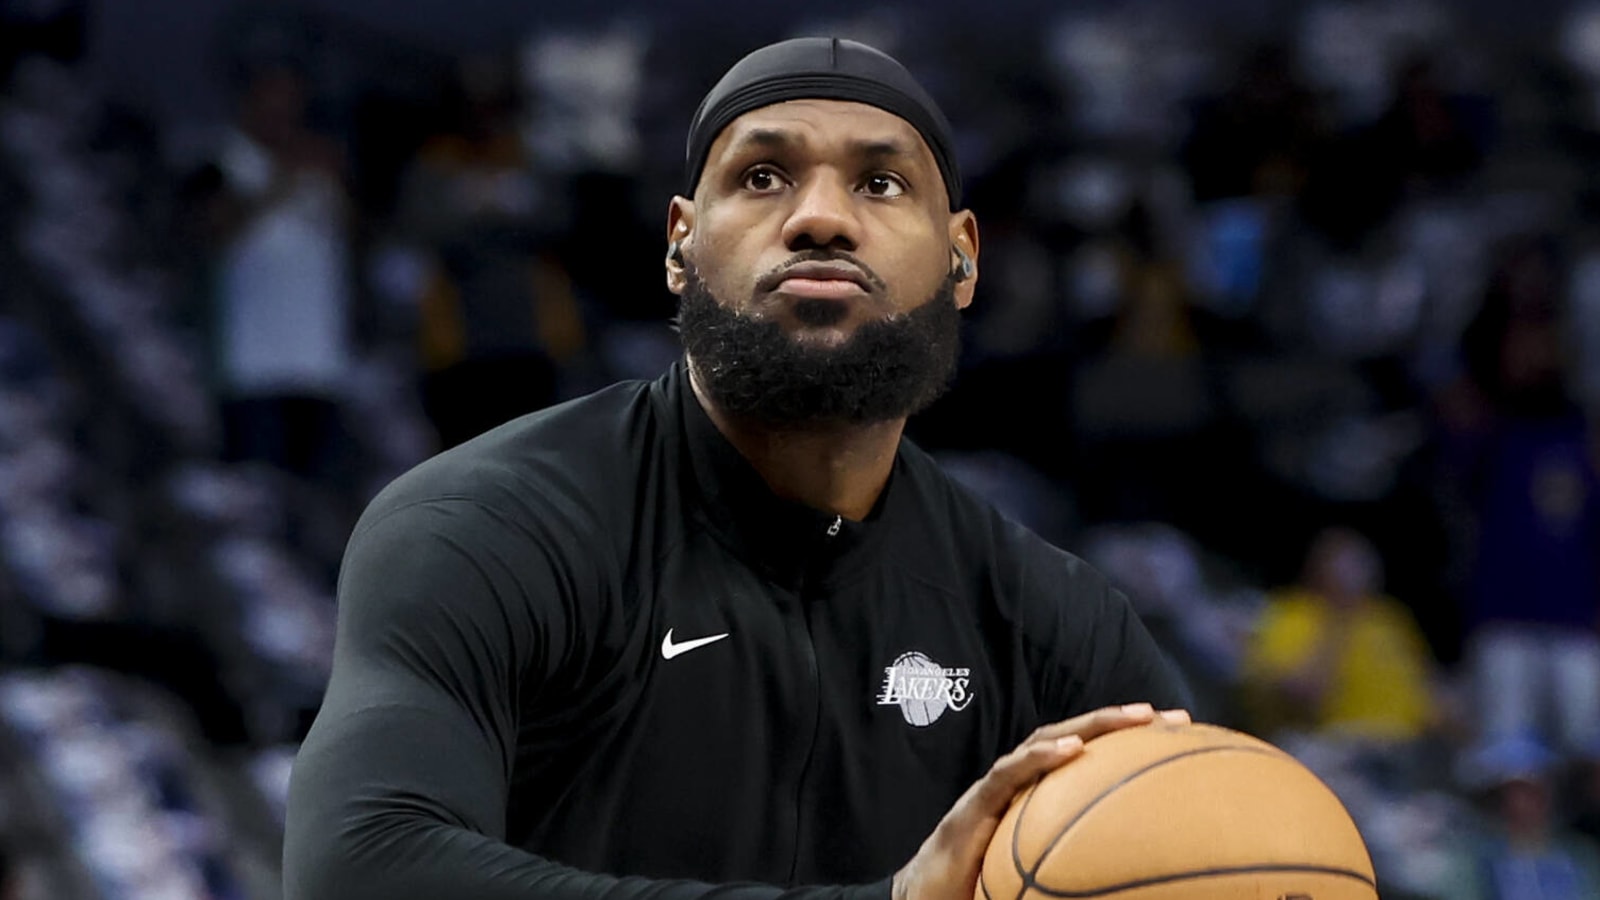 Lakers' LeBron James out at least three weeks with foot injury